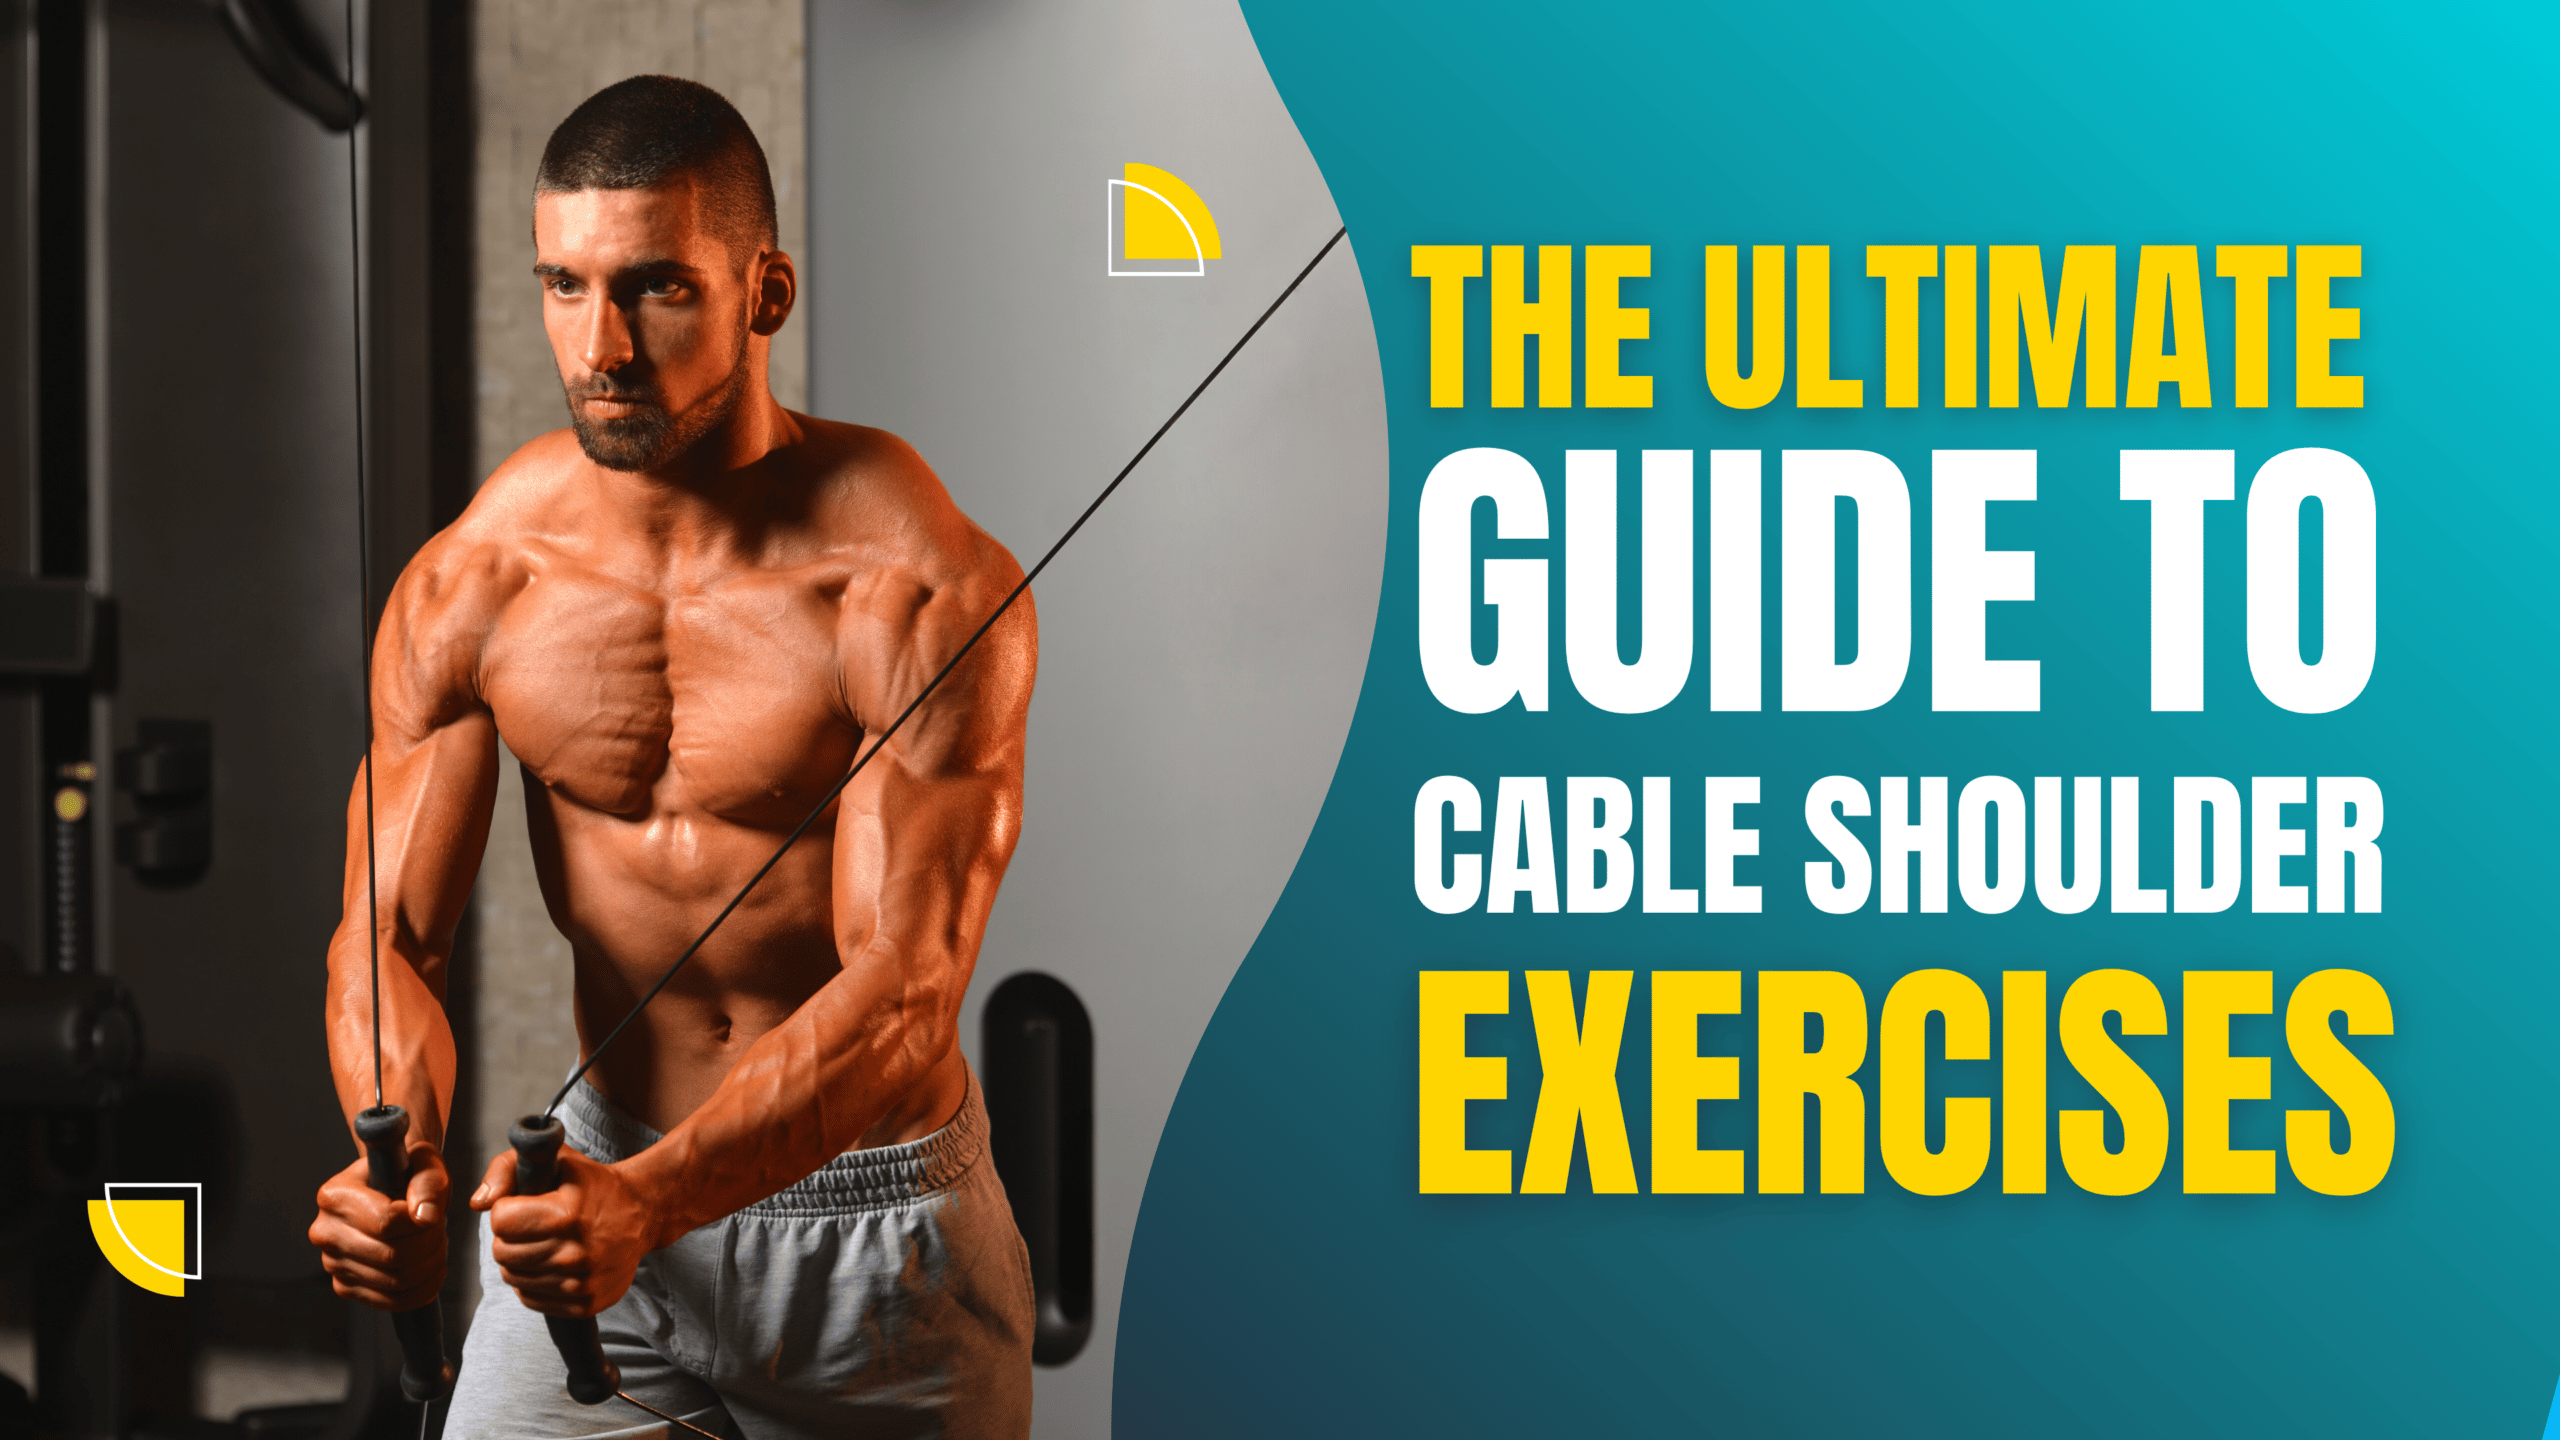 Man doing cable machine exercises